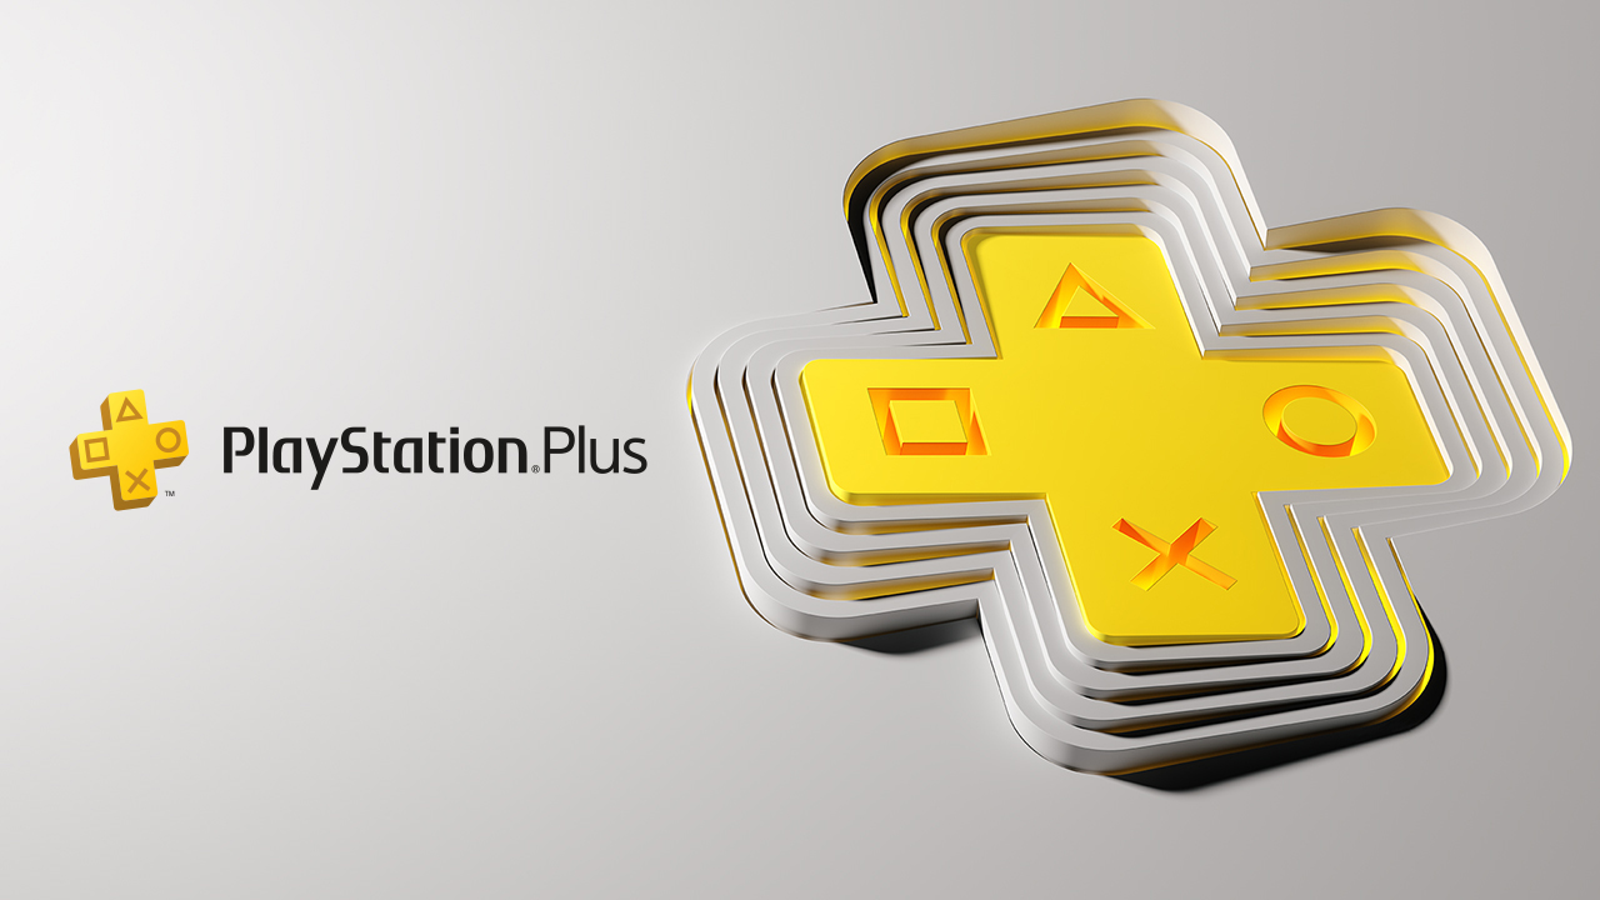 OTHER] PlayStation just announced their new PS Plus Extra and